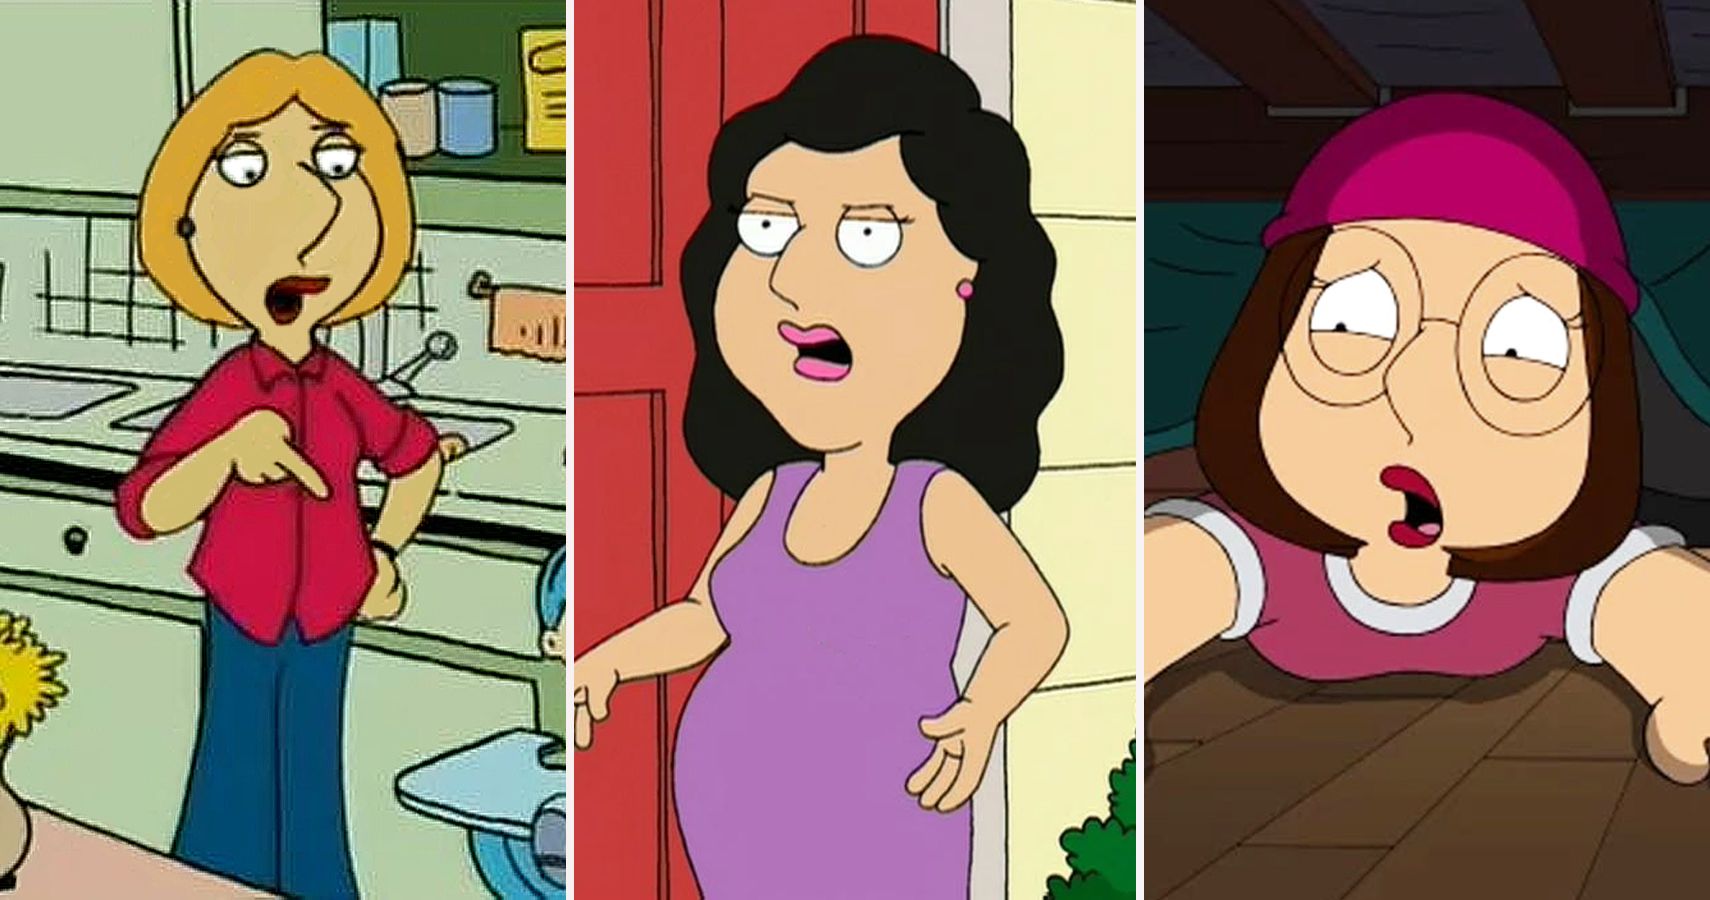 andreas gerner recommends who plays bonnie on family guy pic